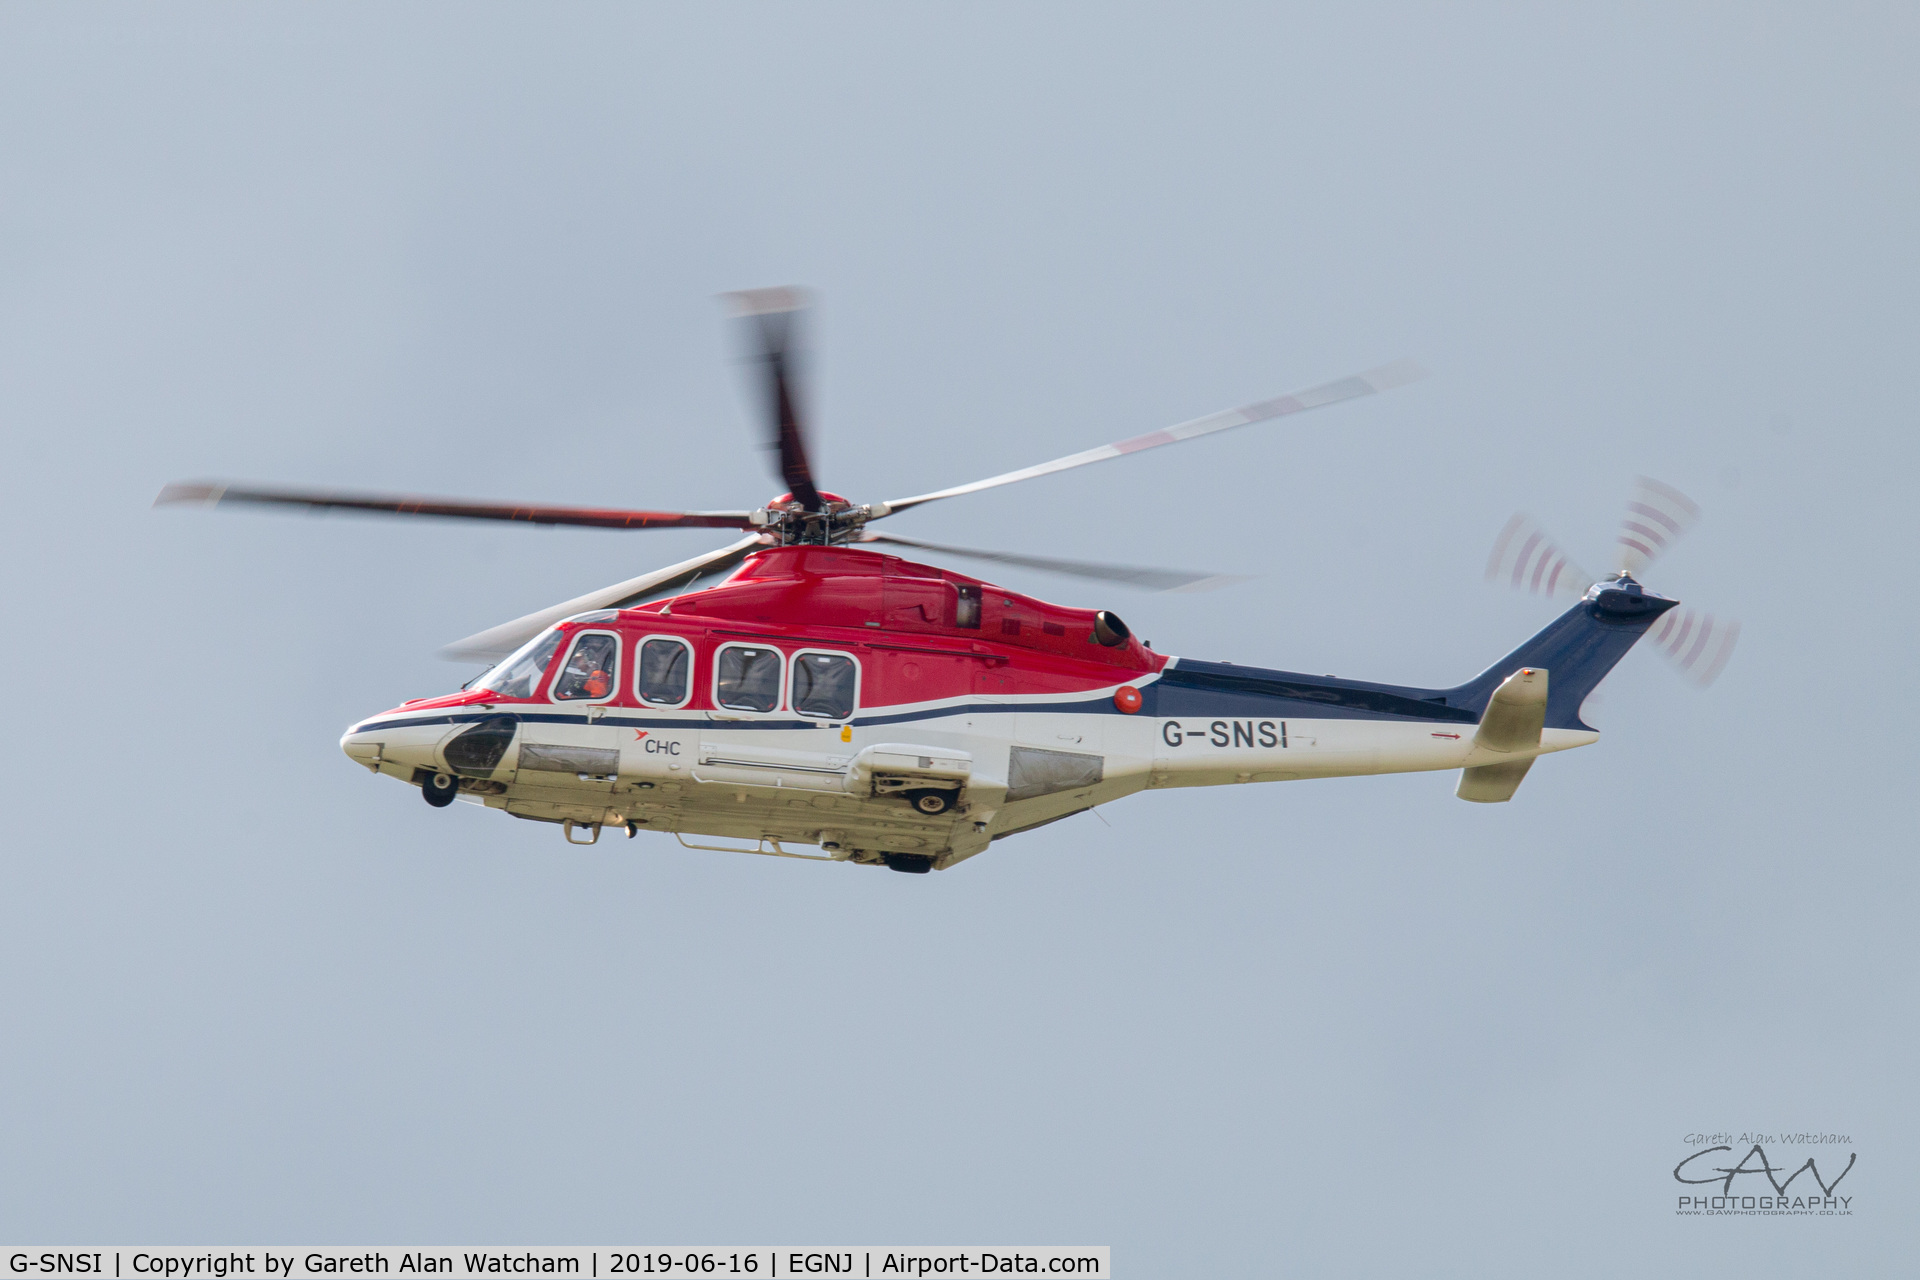 G-SNSI, 2013 AgustaWestland AW-139 C/N 31479, Launching from Humberside Airport